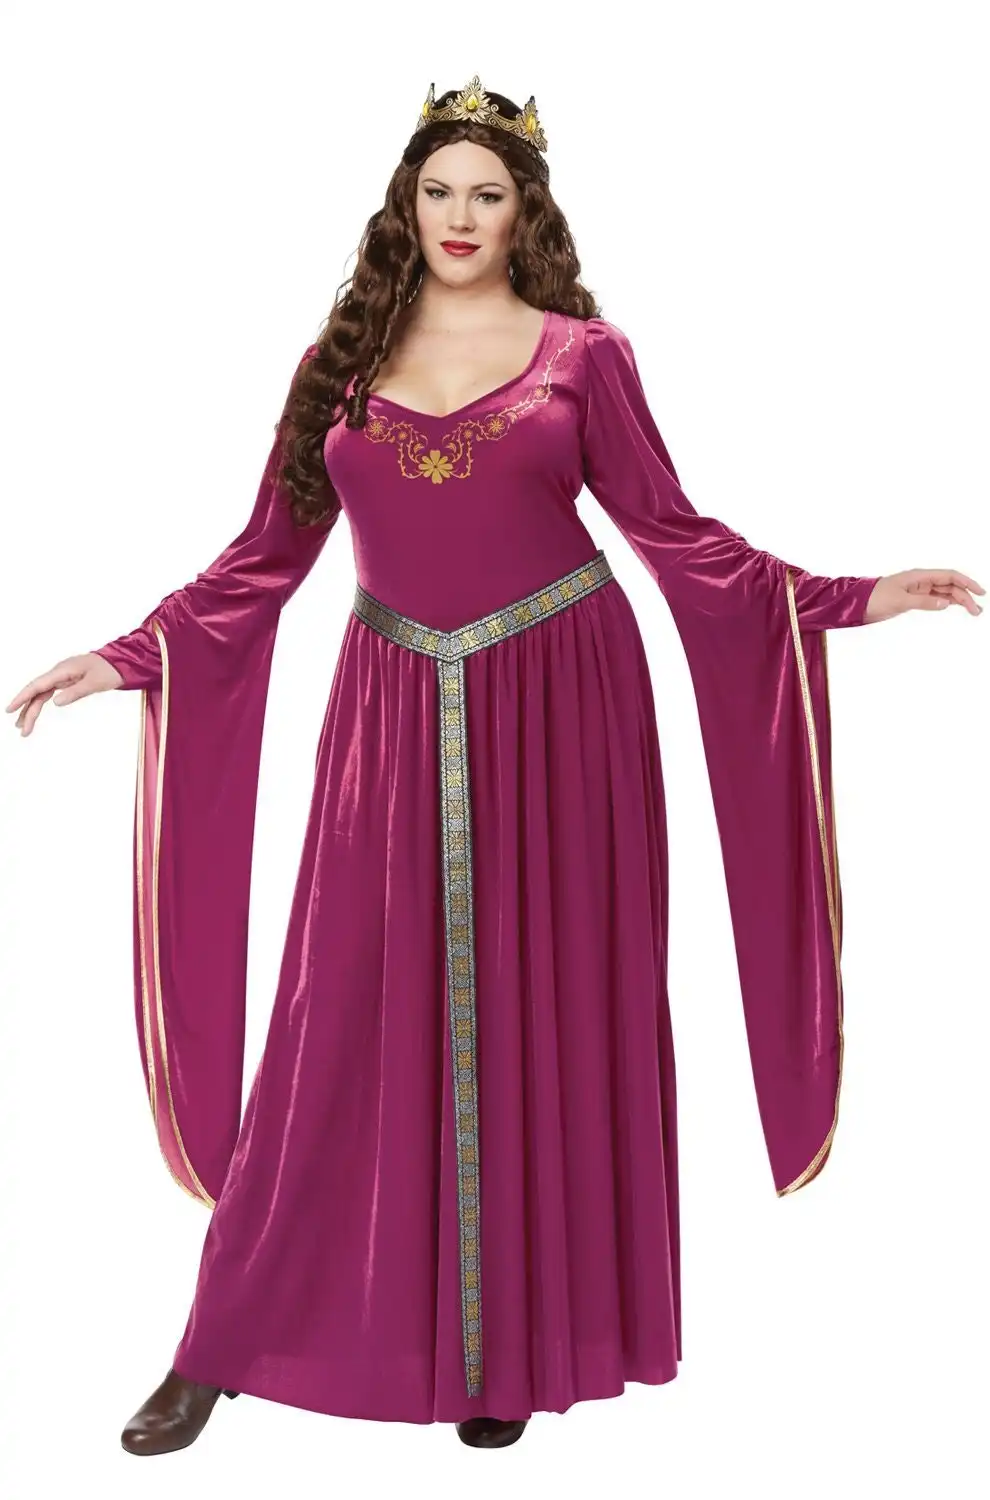 Lady Guinevere Medieval Womens Costume